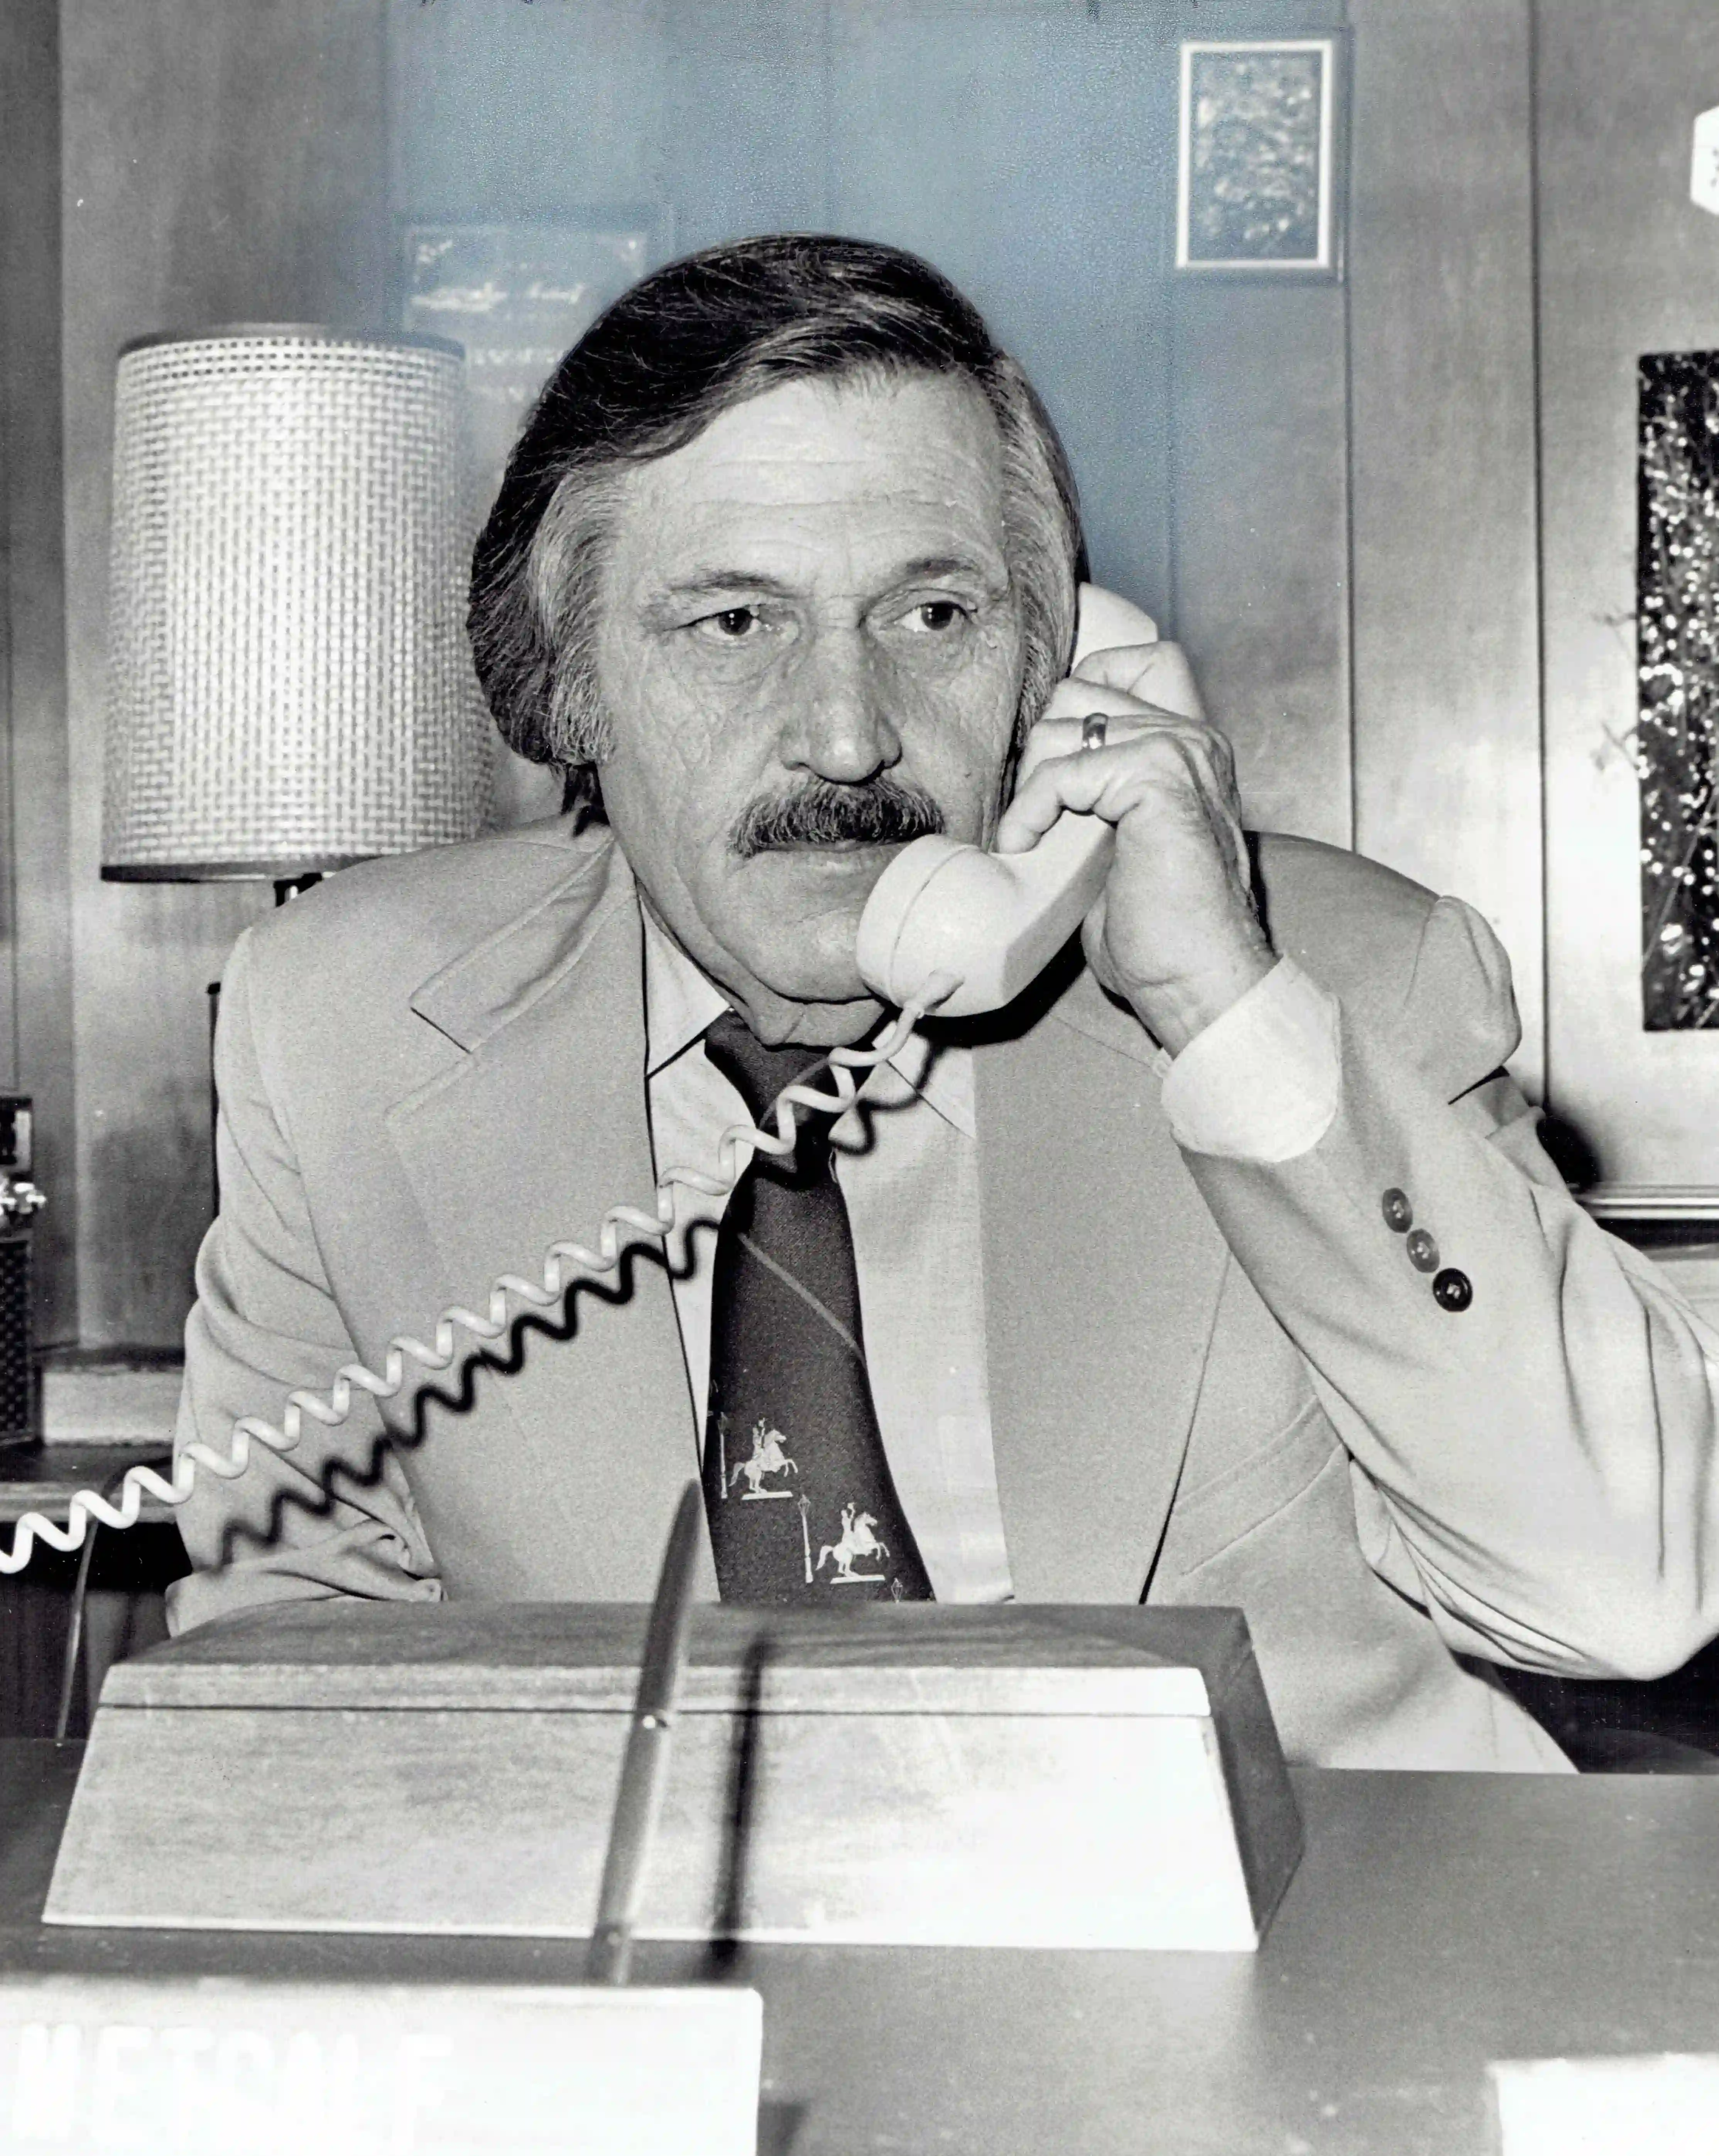 Black and white portrait of Jim Metcalf from April 1975, as he takes a call at his desk, with a white phone receiver to his left ear with the coiled phone cable extending to his right, beyond the edge of the frame. His dark, greying hair is swept back from his face, which smiles only with his eyes, while his broad moustache sweeps the edge of the phone receiver. A dark tie boldly splits his light colored suit, which sports the broad lapel of the era. An unmarked wood box of writing accoutrements, with sloping trapezoidal sides sits in front of him, as he focuses his gaze to his left, off into the distance.